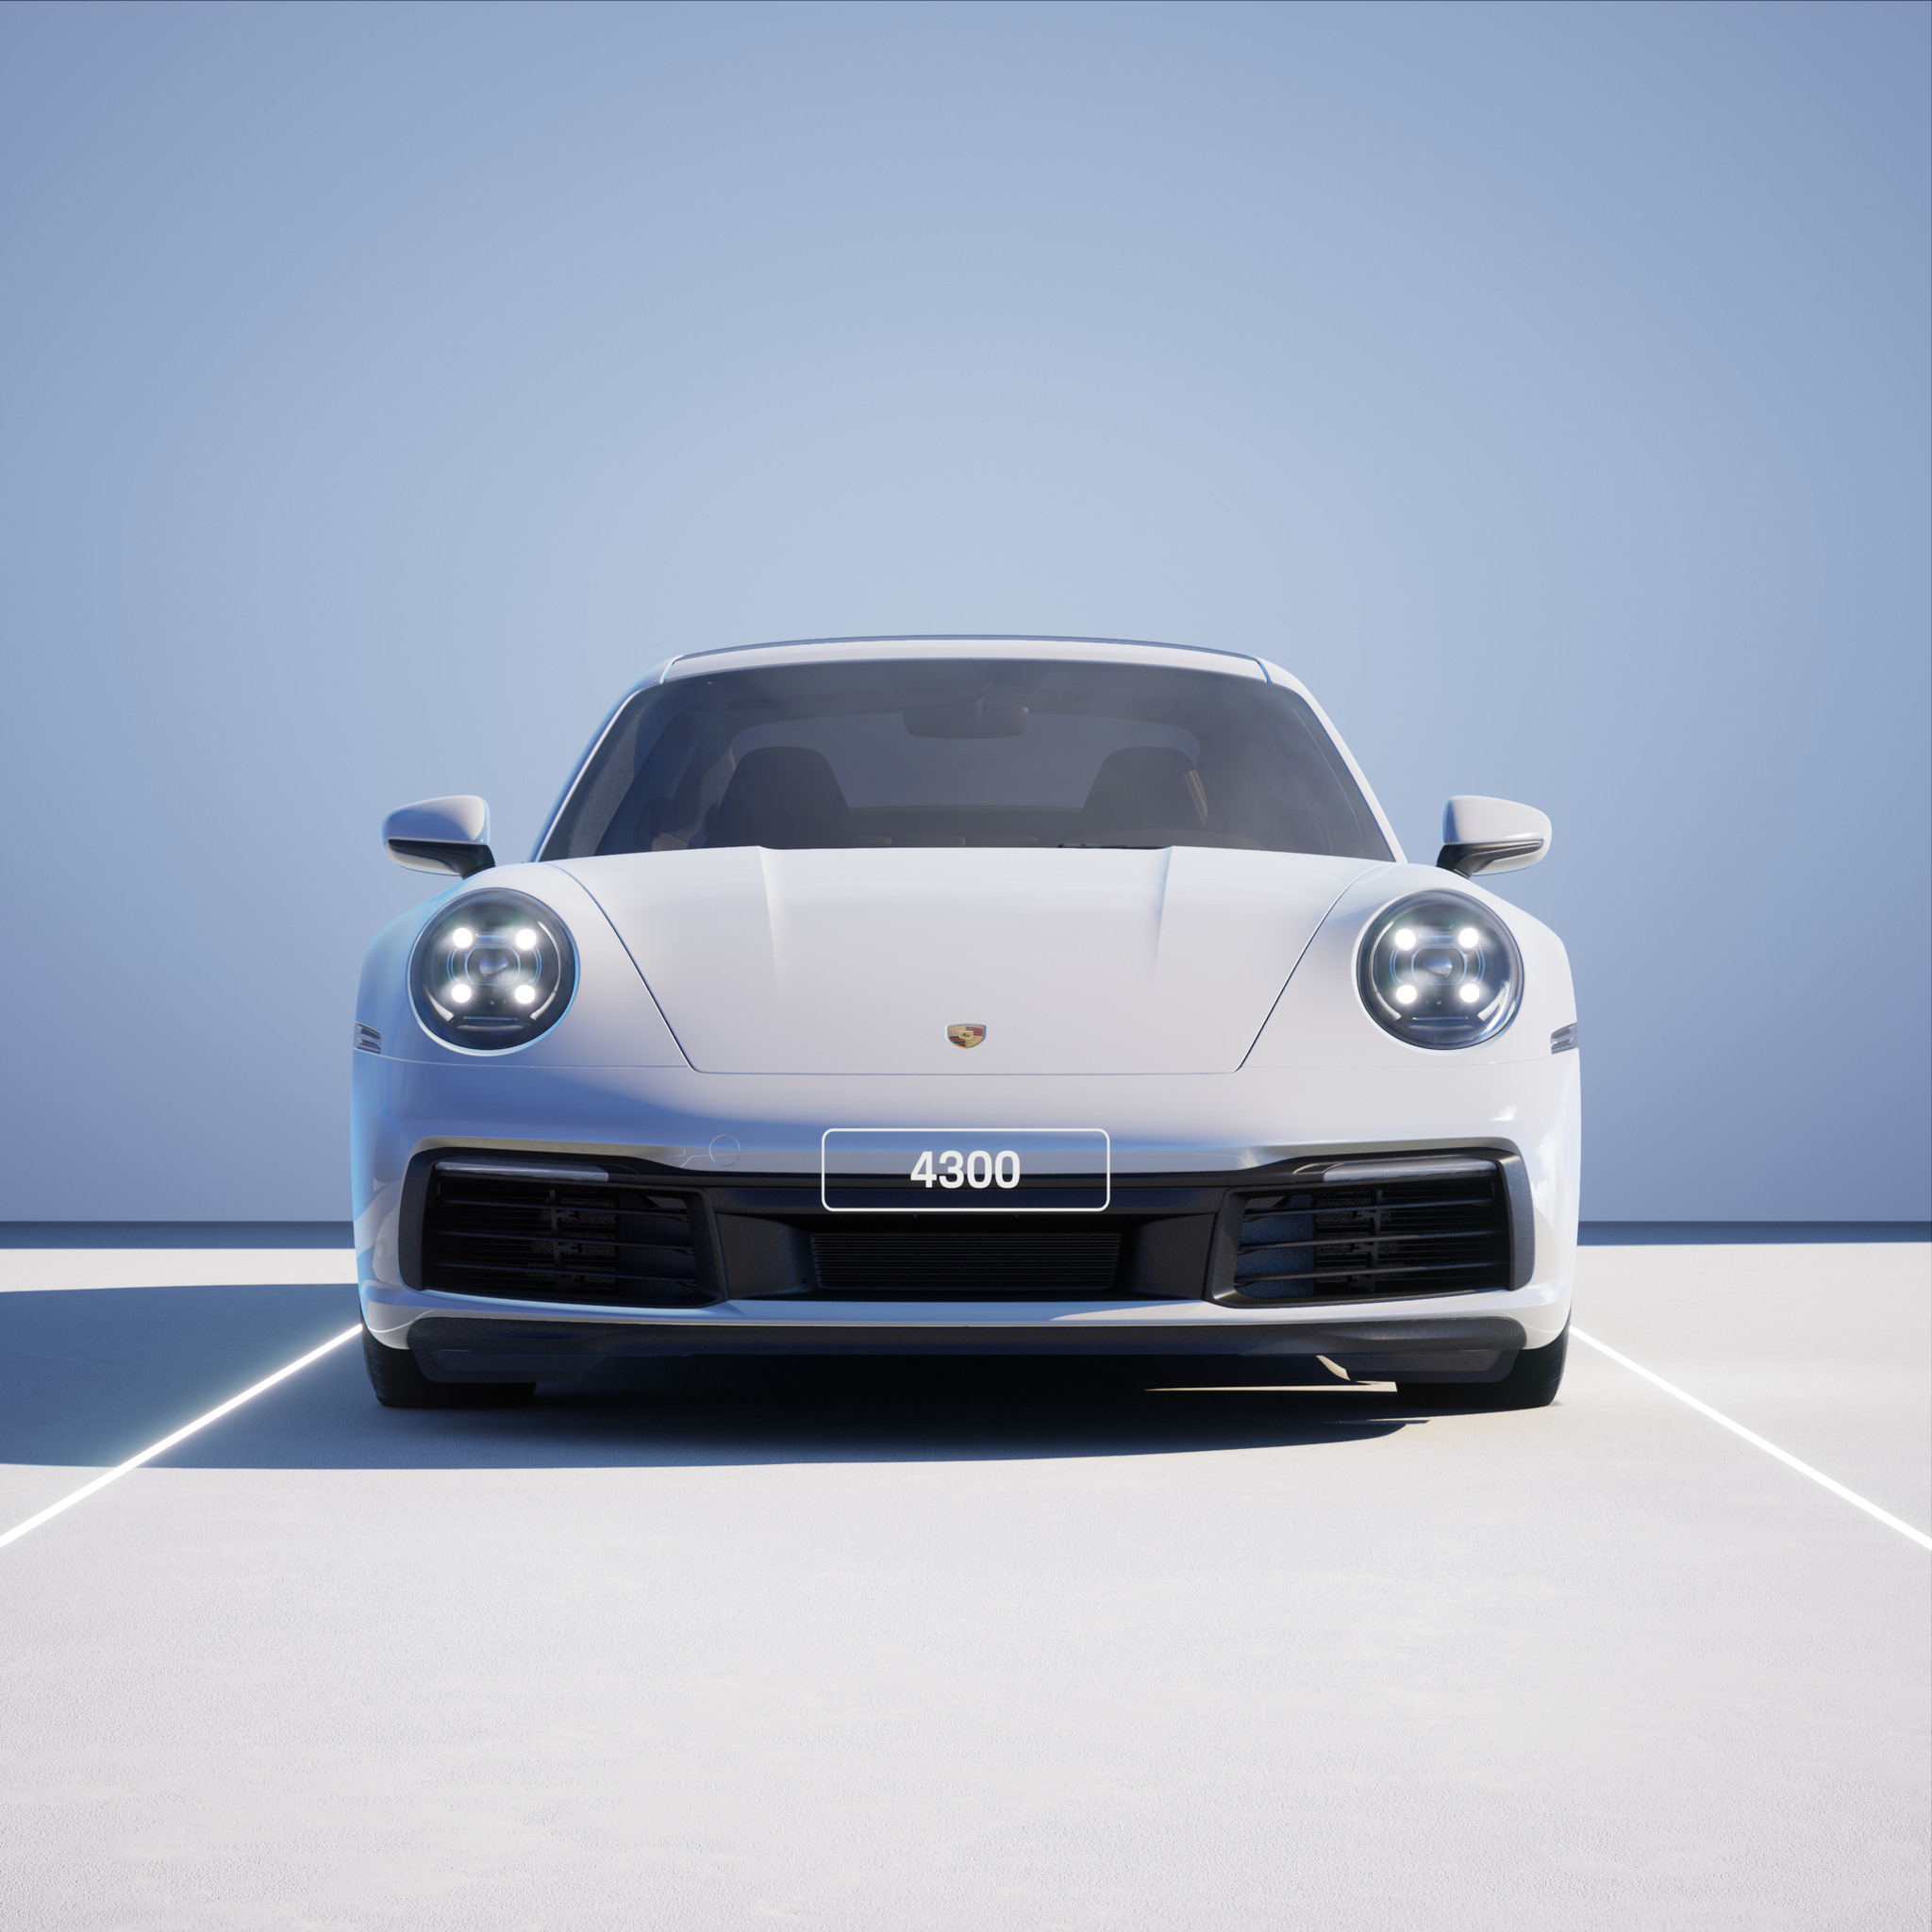 The PORSCHΞ 911 4300 image in phase